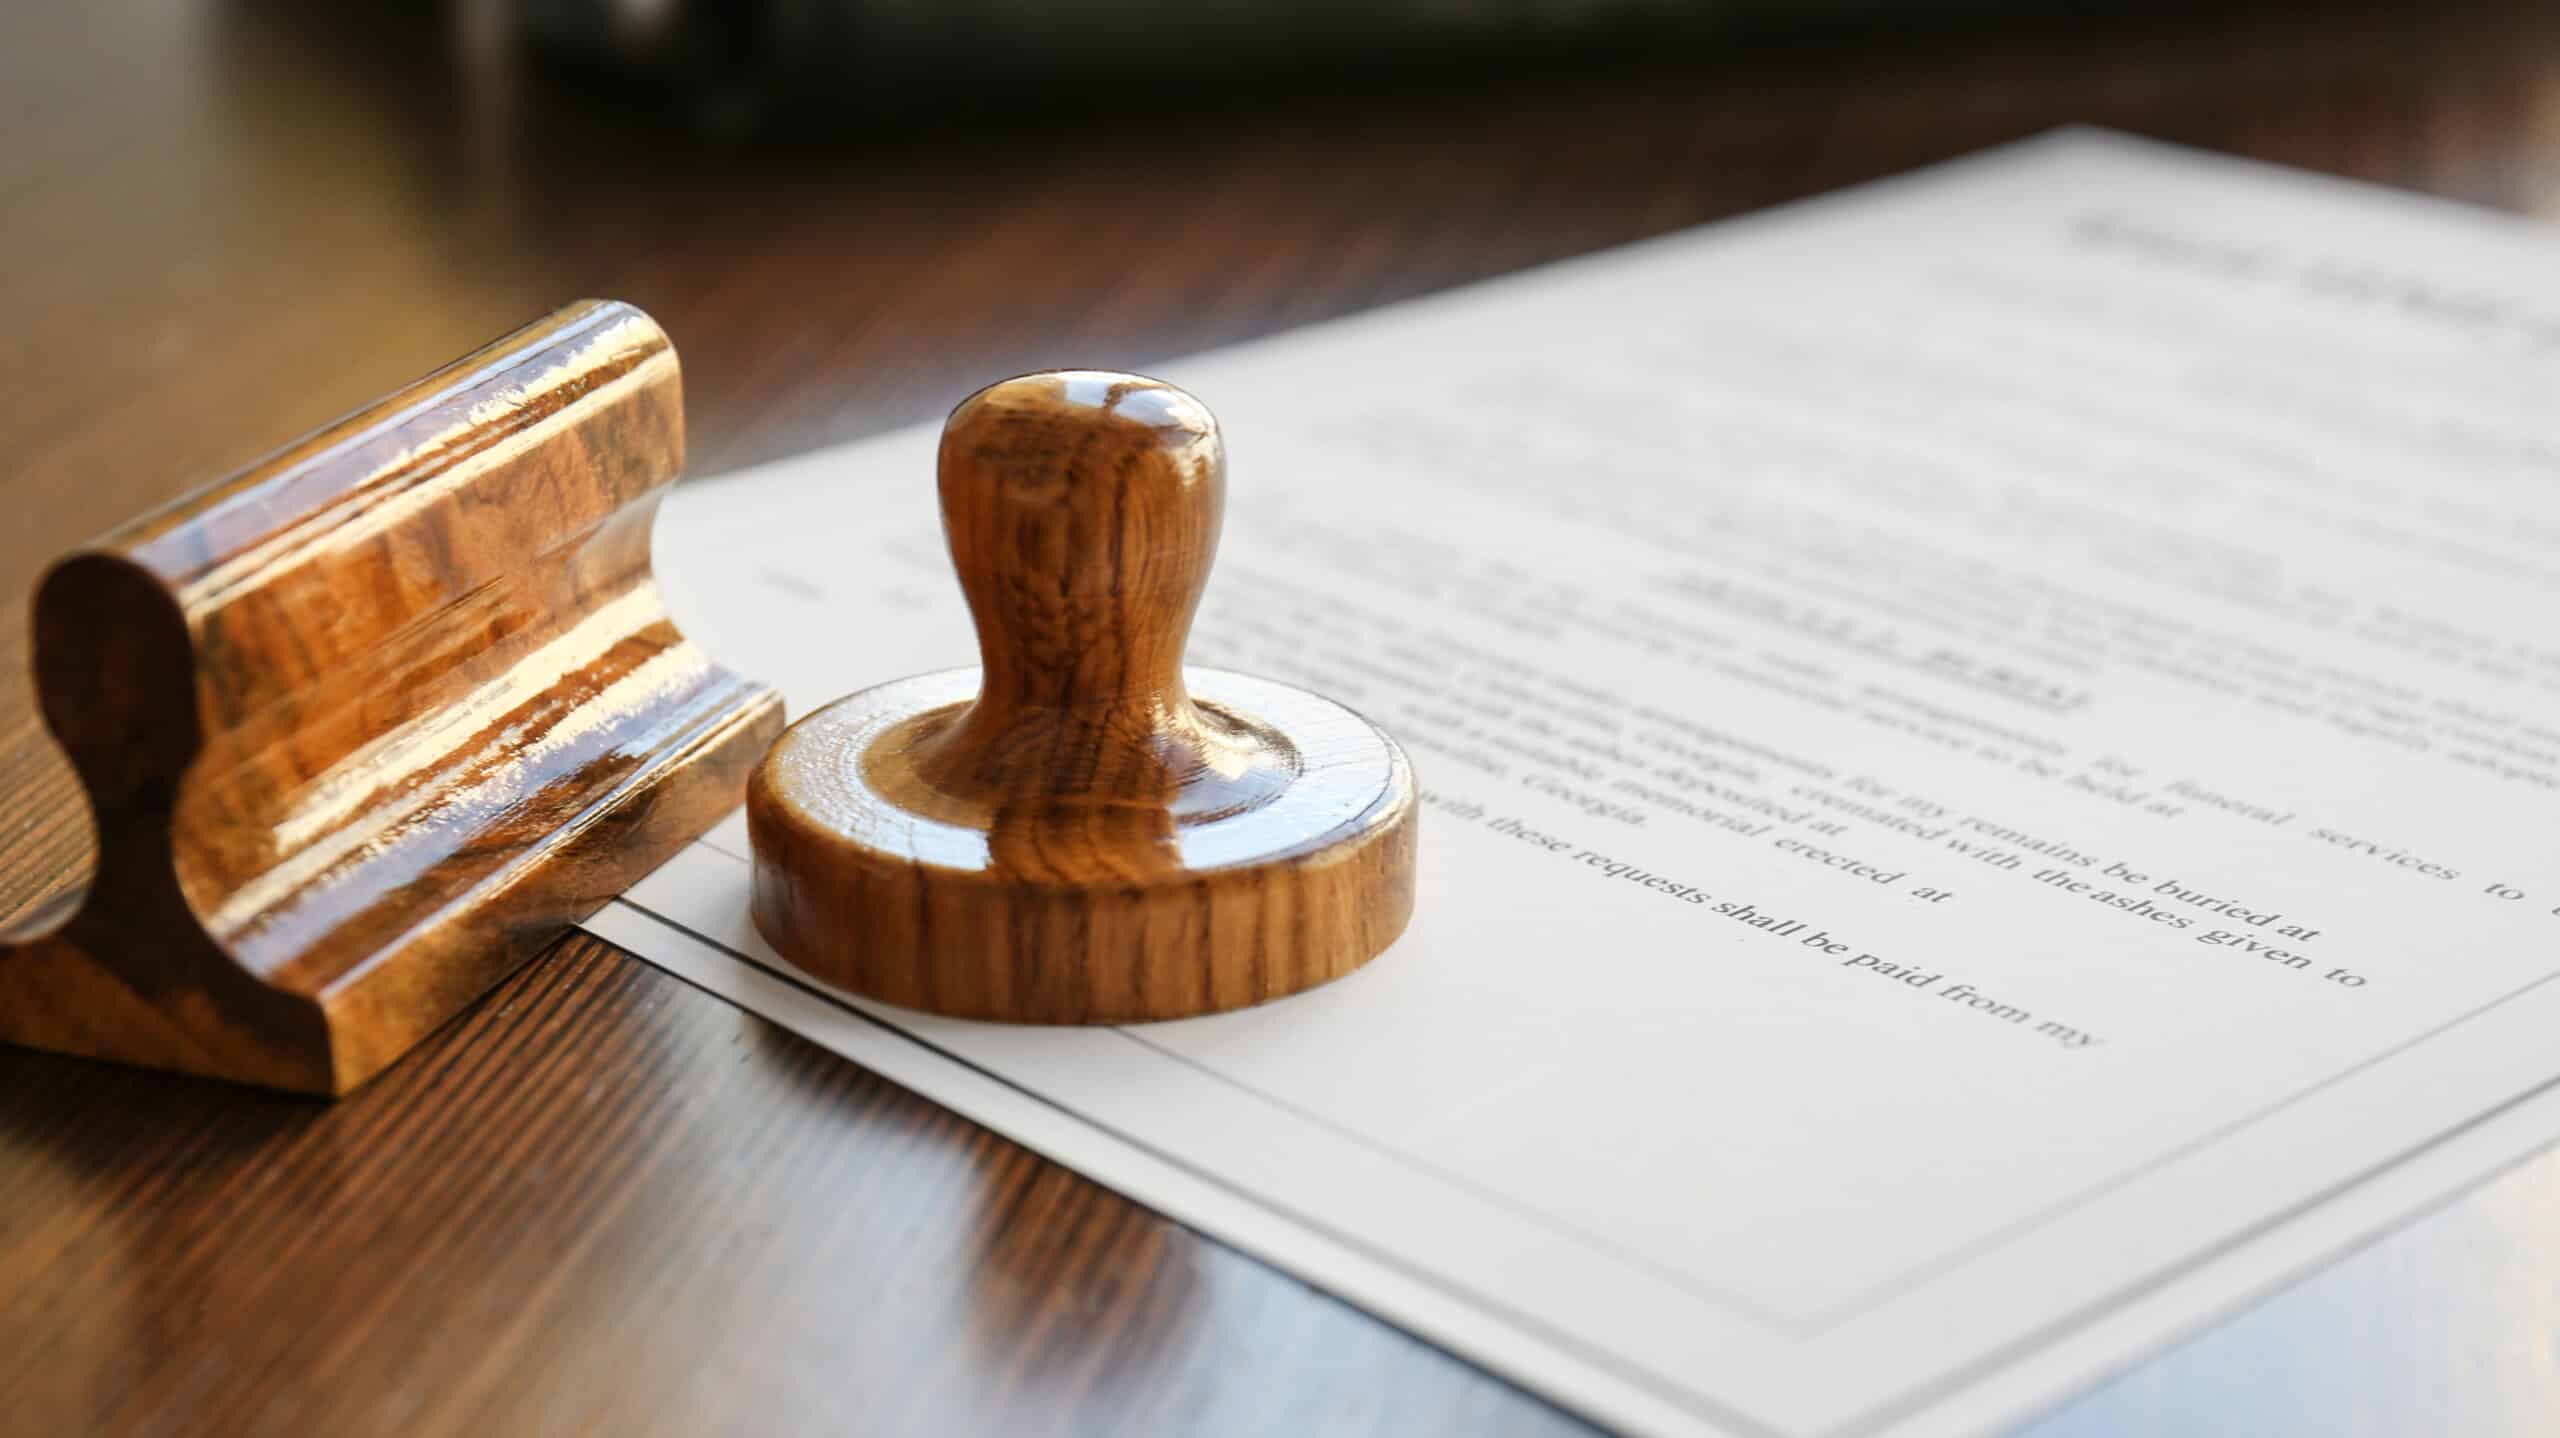 Two stampers rest on a legal document - The Importance Of Rehab Accreditation